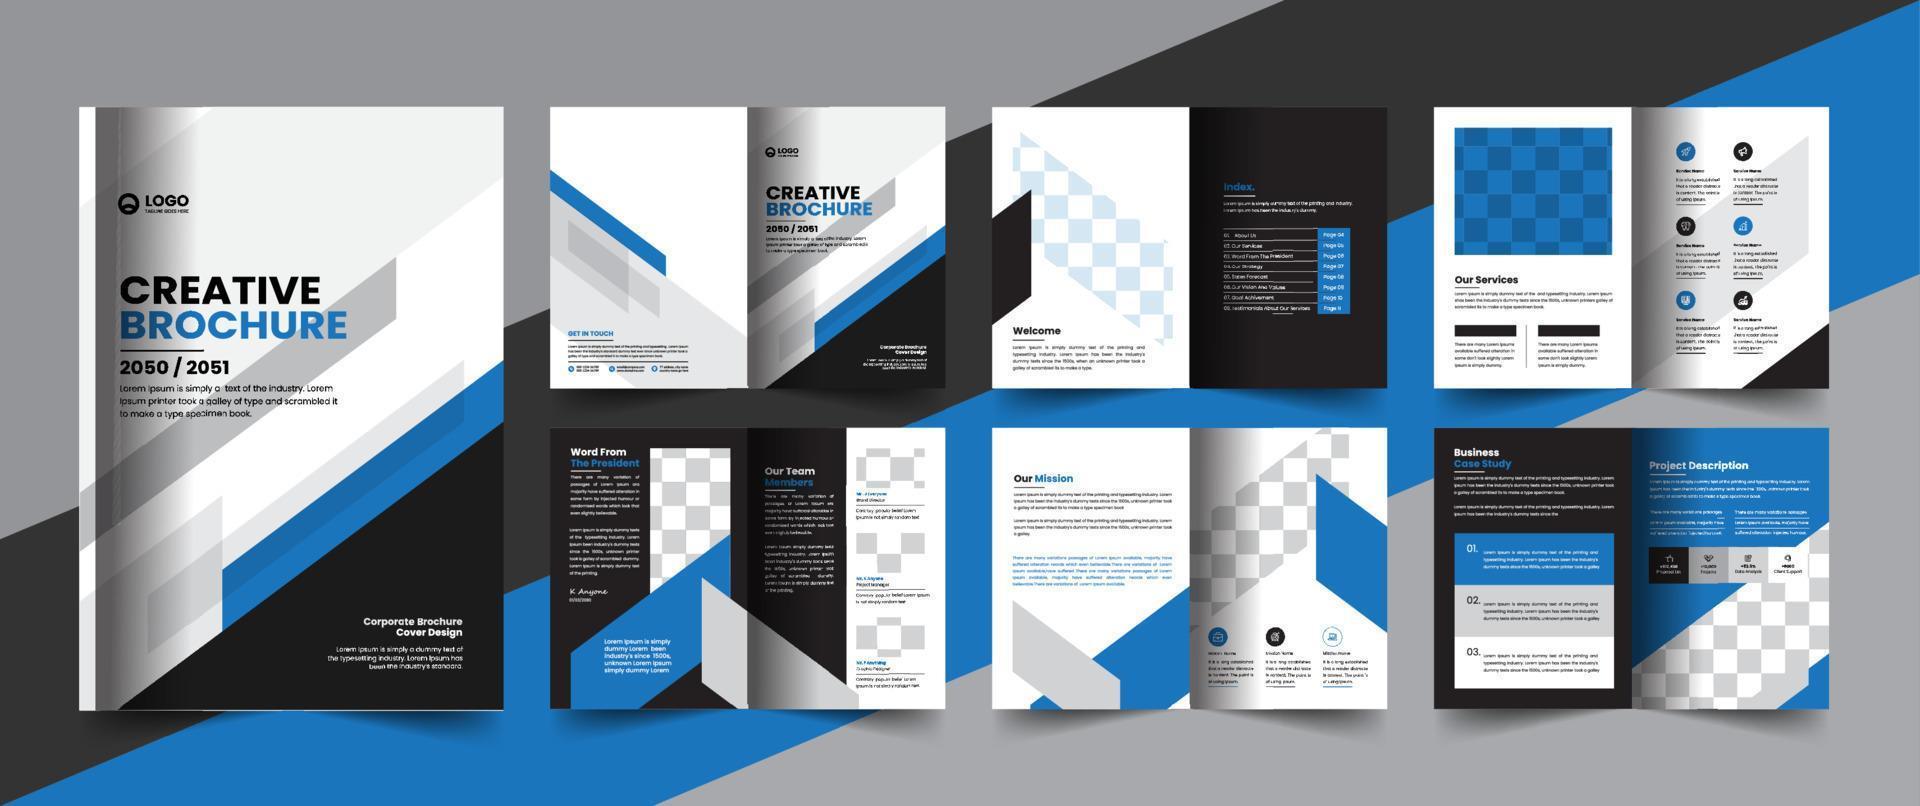 Corporate company profile brochure annual report booklet business proposal layout concept design vector